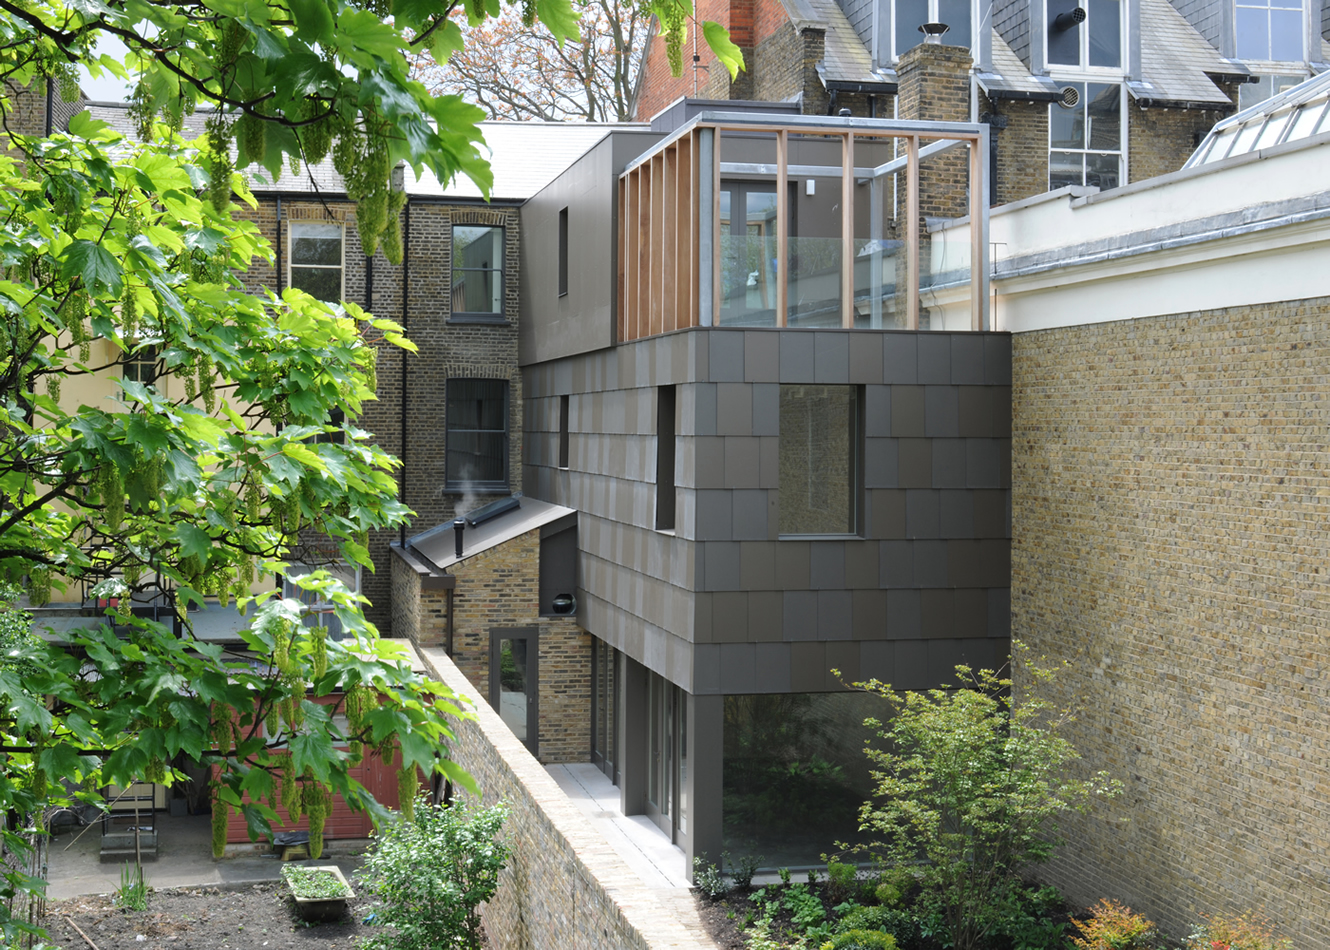 South London Gallery with 6a Architects